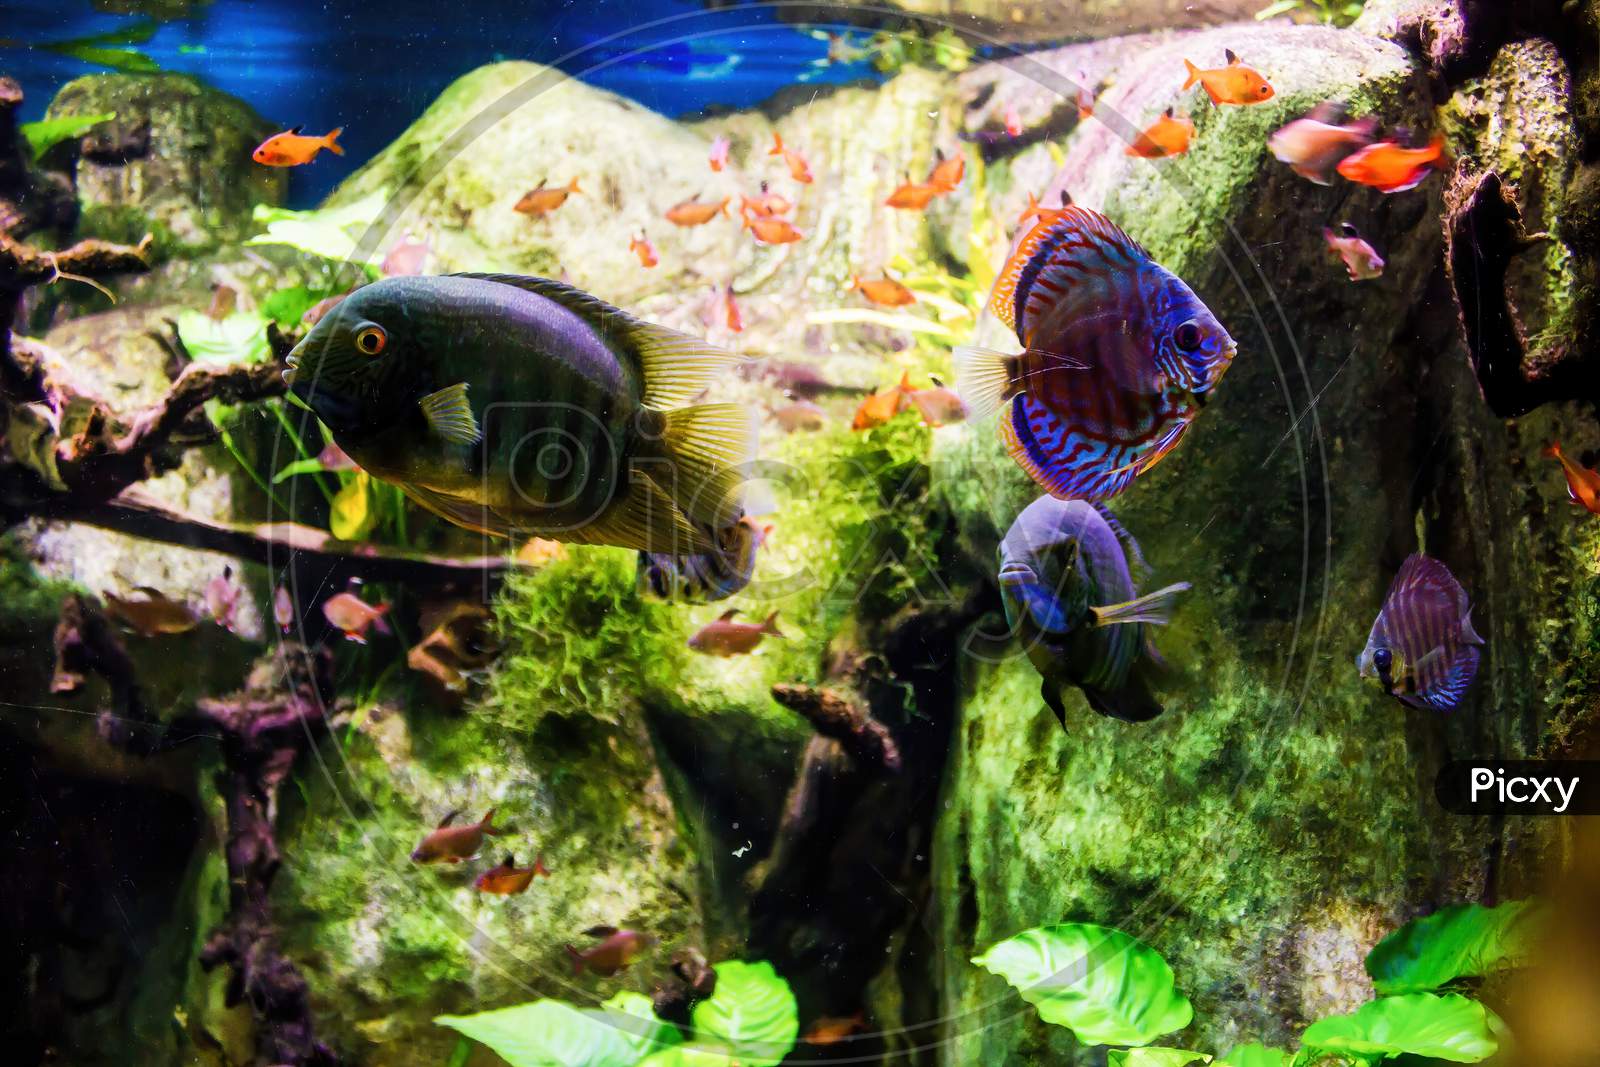 Malaga, Spain: Underwater Ocean Life With Colorful Fish